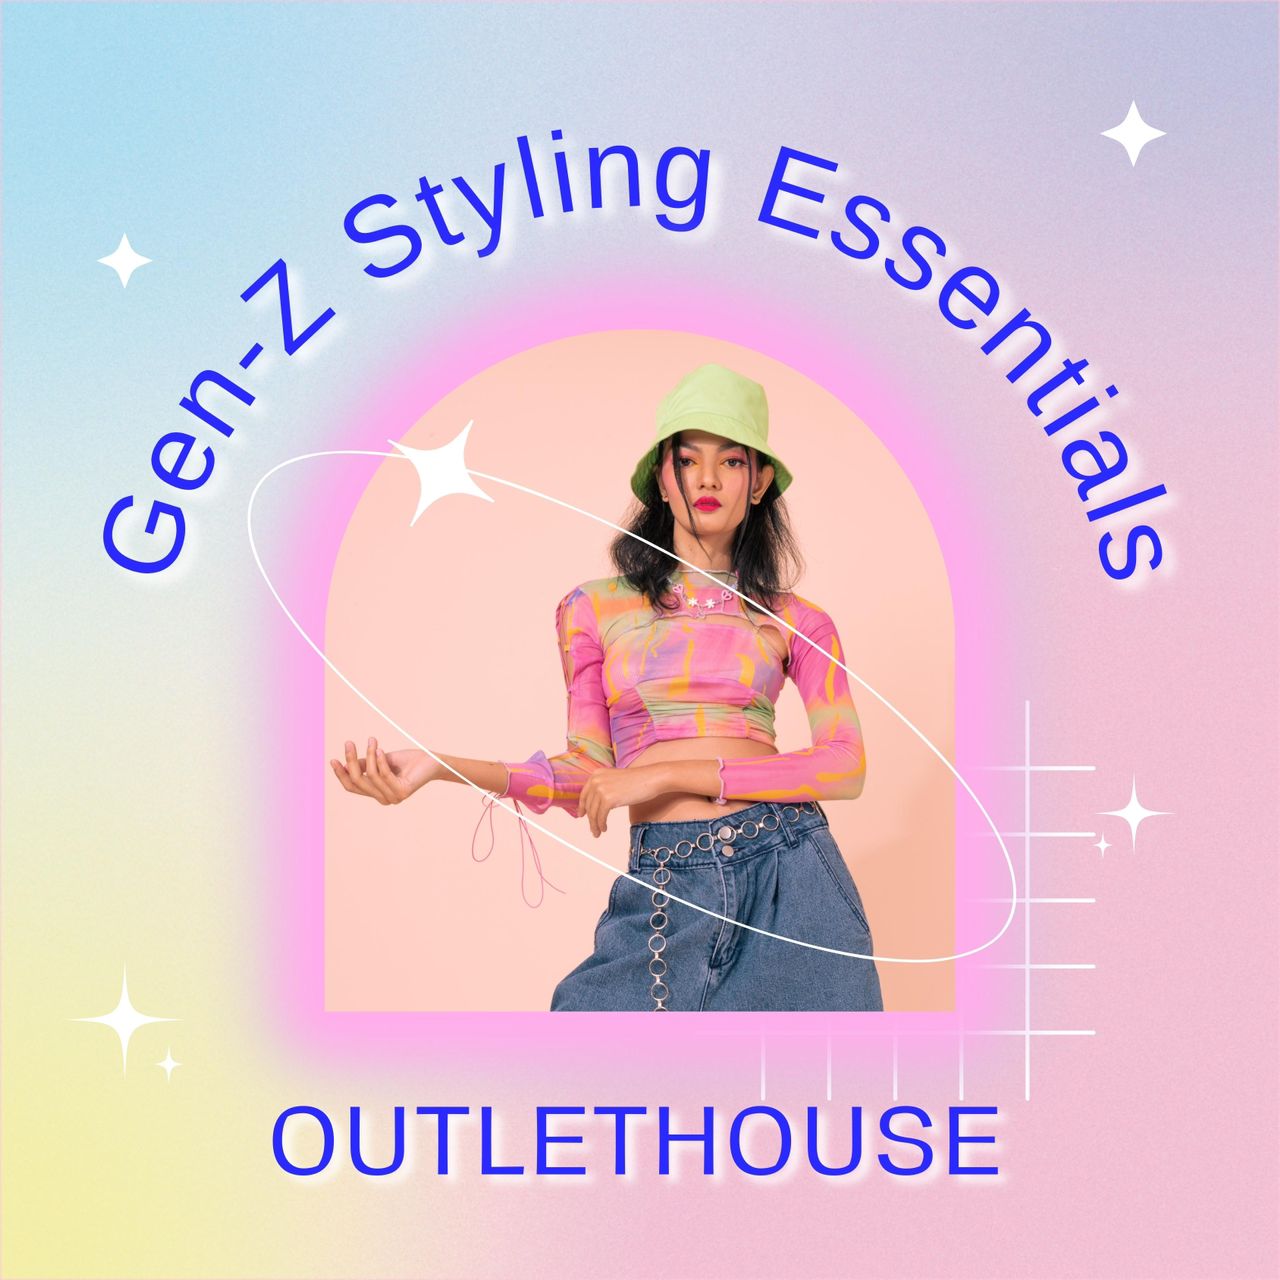 5 Gen-Z Styling Essentials You Can Add to Your Wardrobe